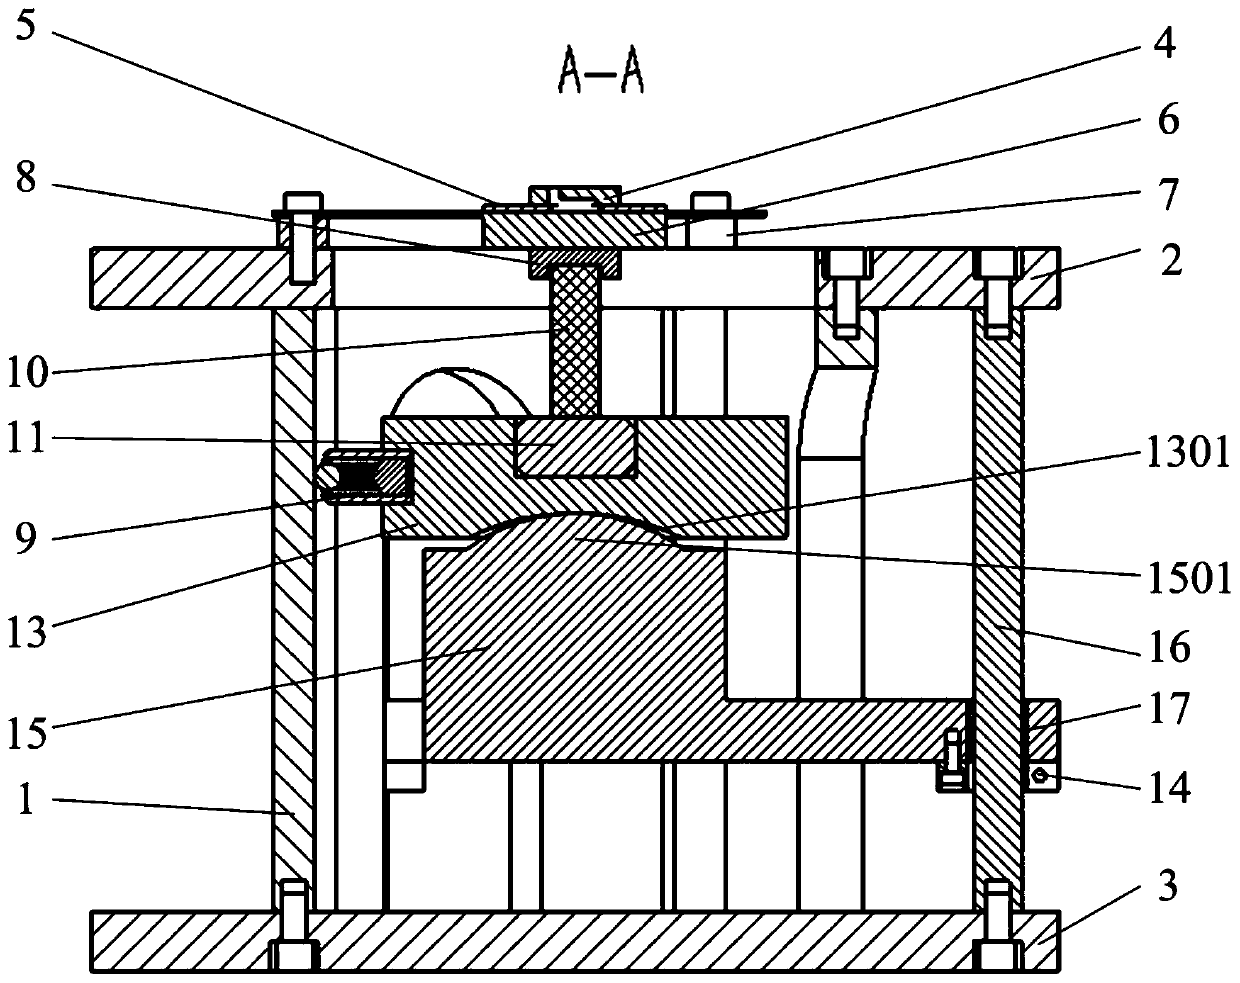 A mems microstructure three-axis vibration excitation device based on base excitation method